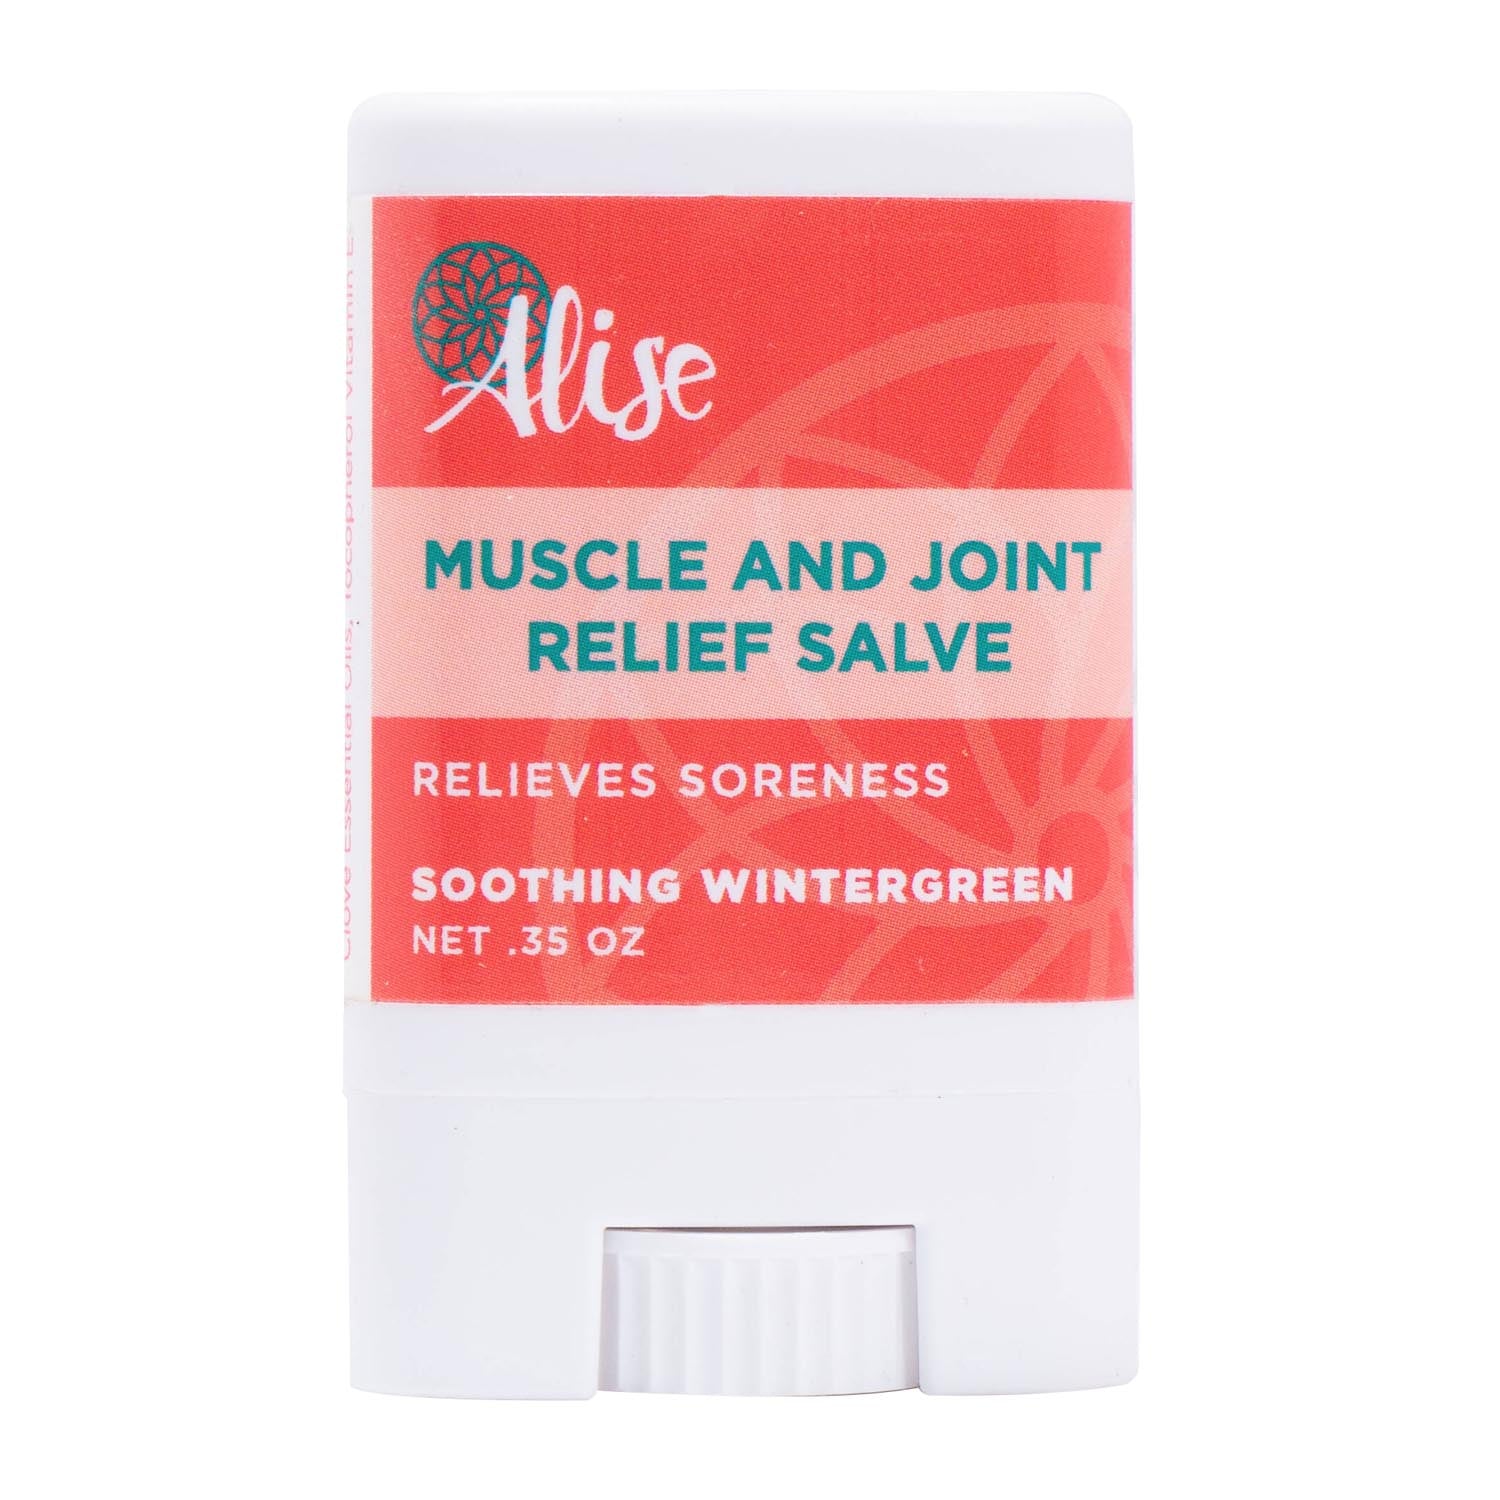 Puremedy Sore Muscles and Joint Relief Homeopathic Skin Salve, 2 oz